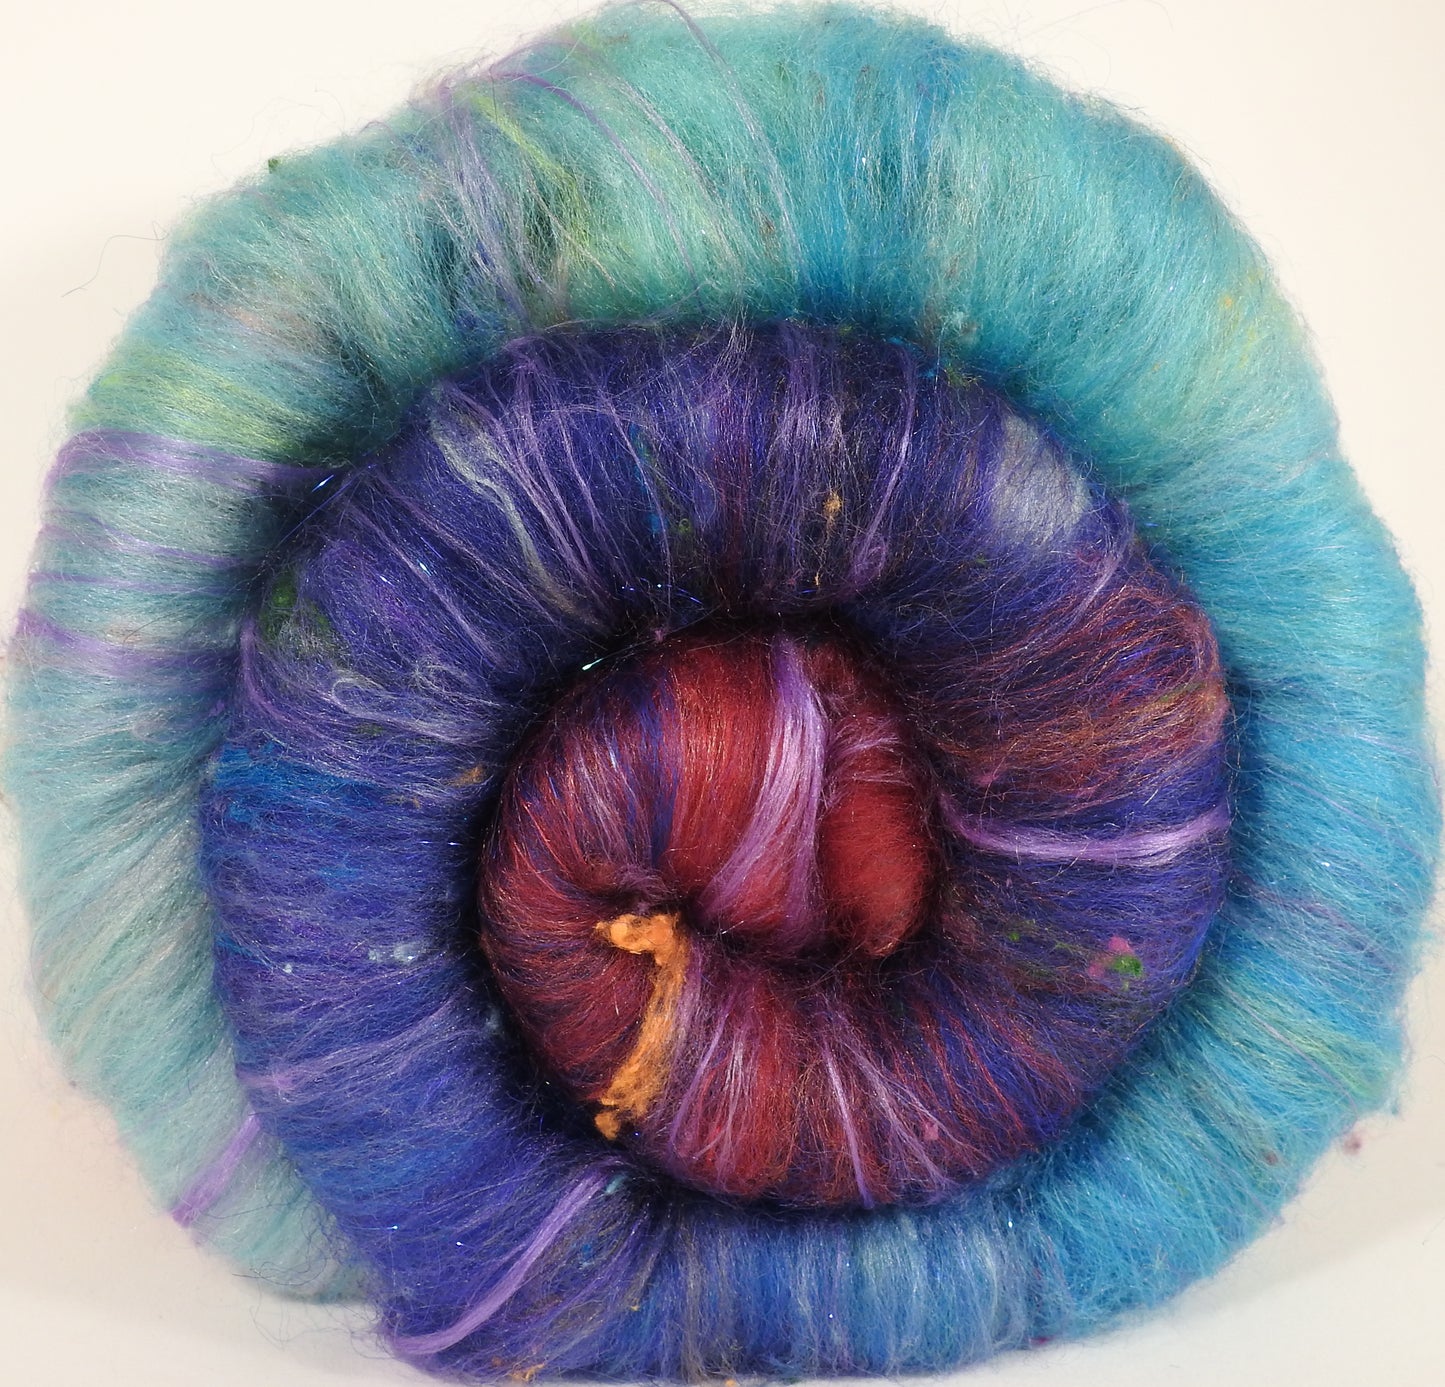 Advice from a Caterpillar - Roly Poly batts- 35% Cotswold fleece, merino, silk, bamboo, silk noil (angelina in the sparkle batts) - Inglenook Fibers